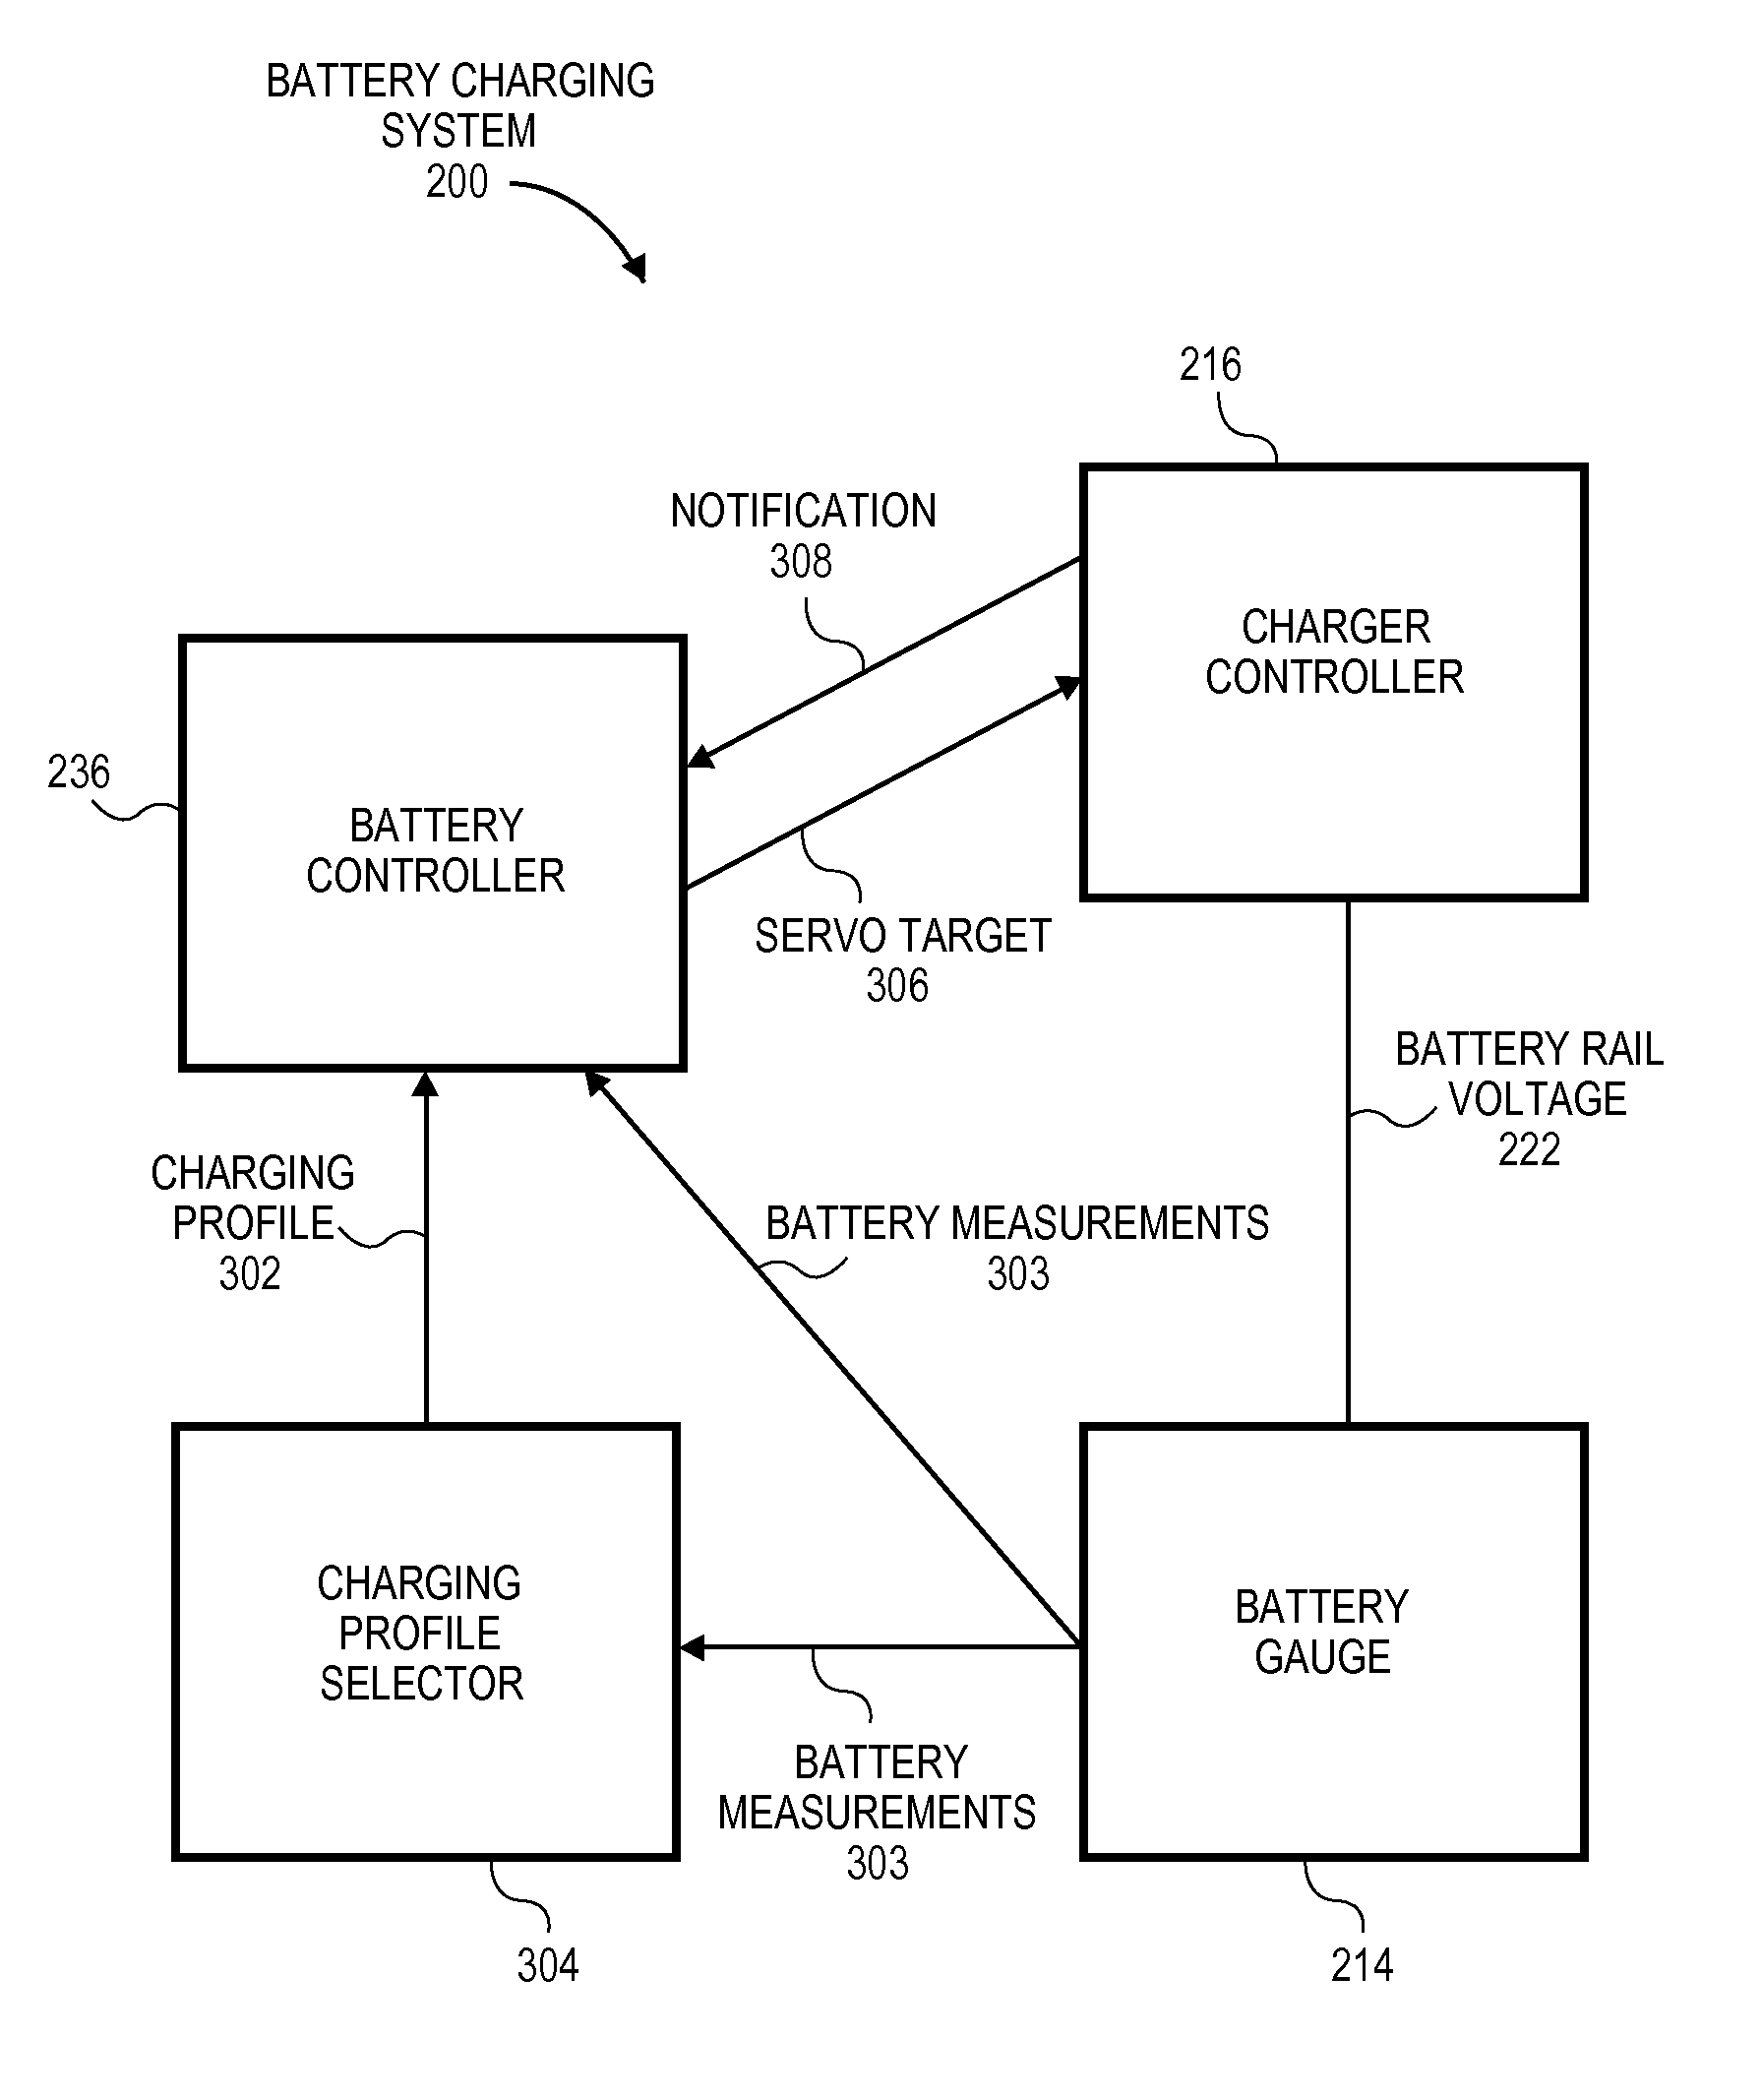 Battery charger with gauge-based closed-loop control